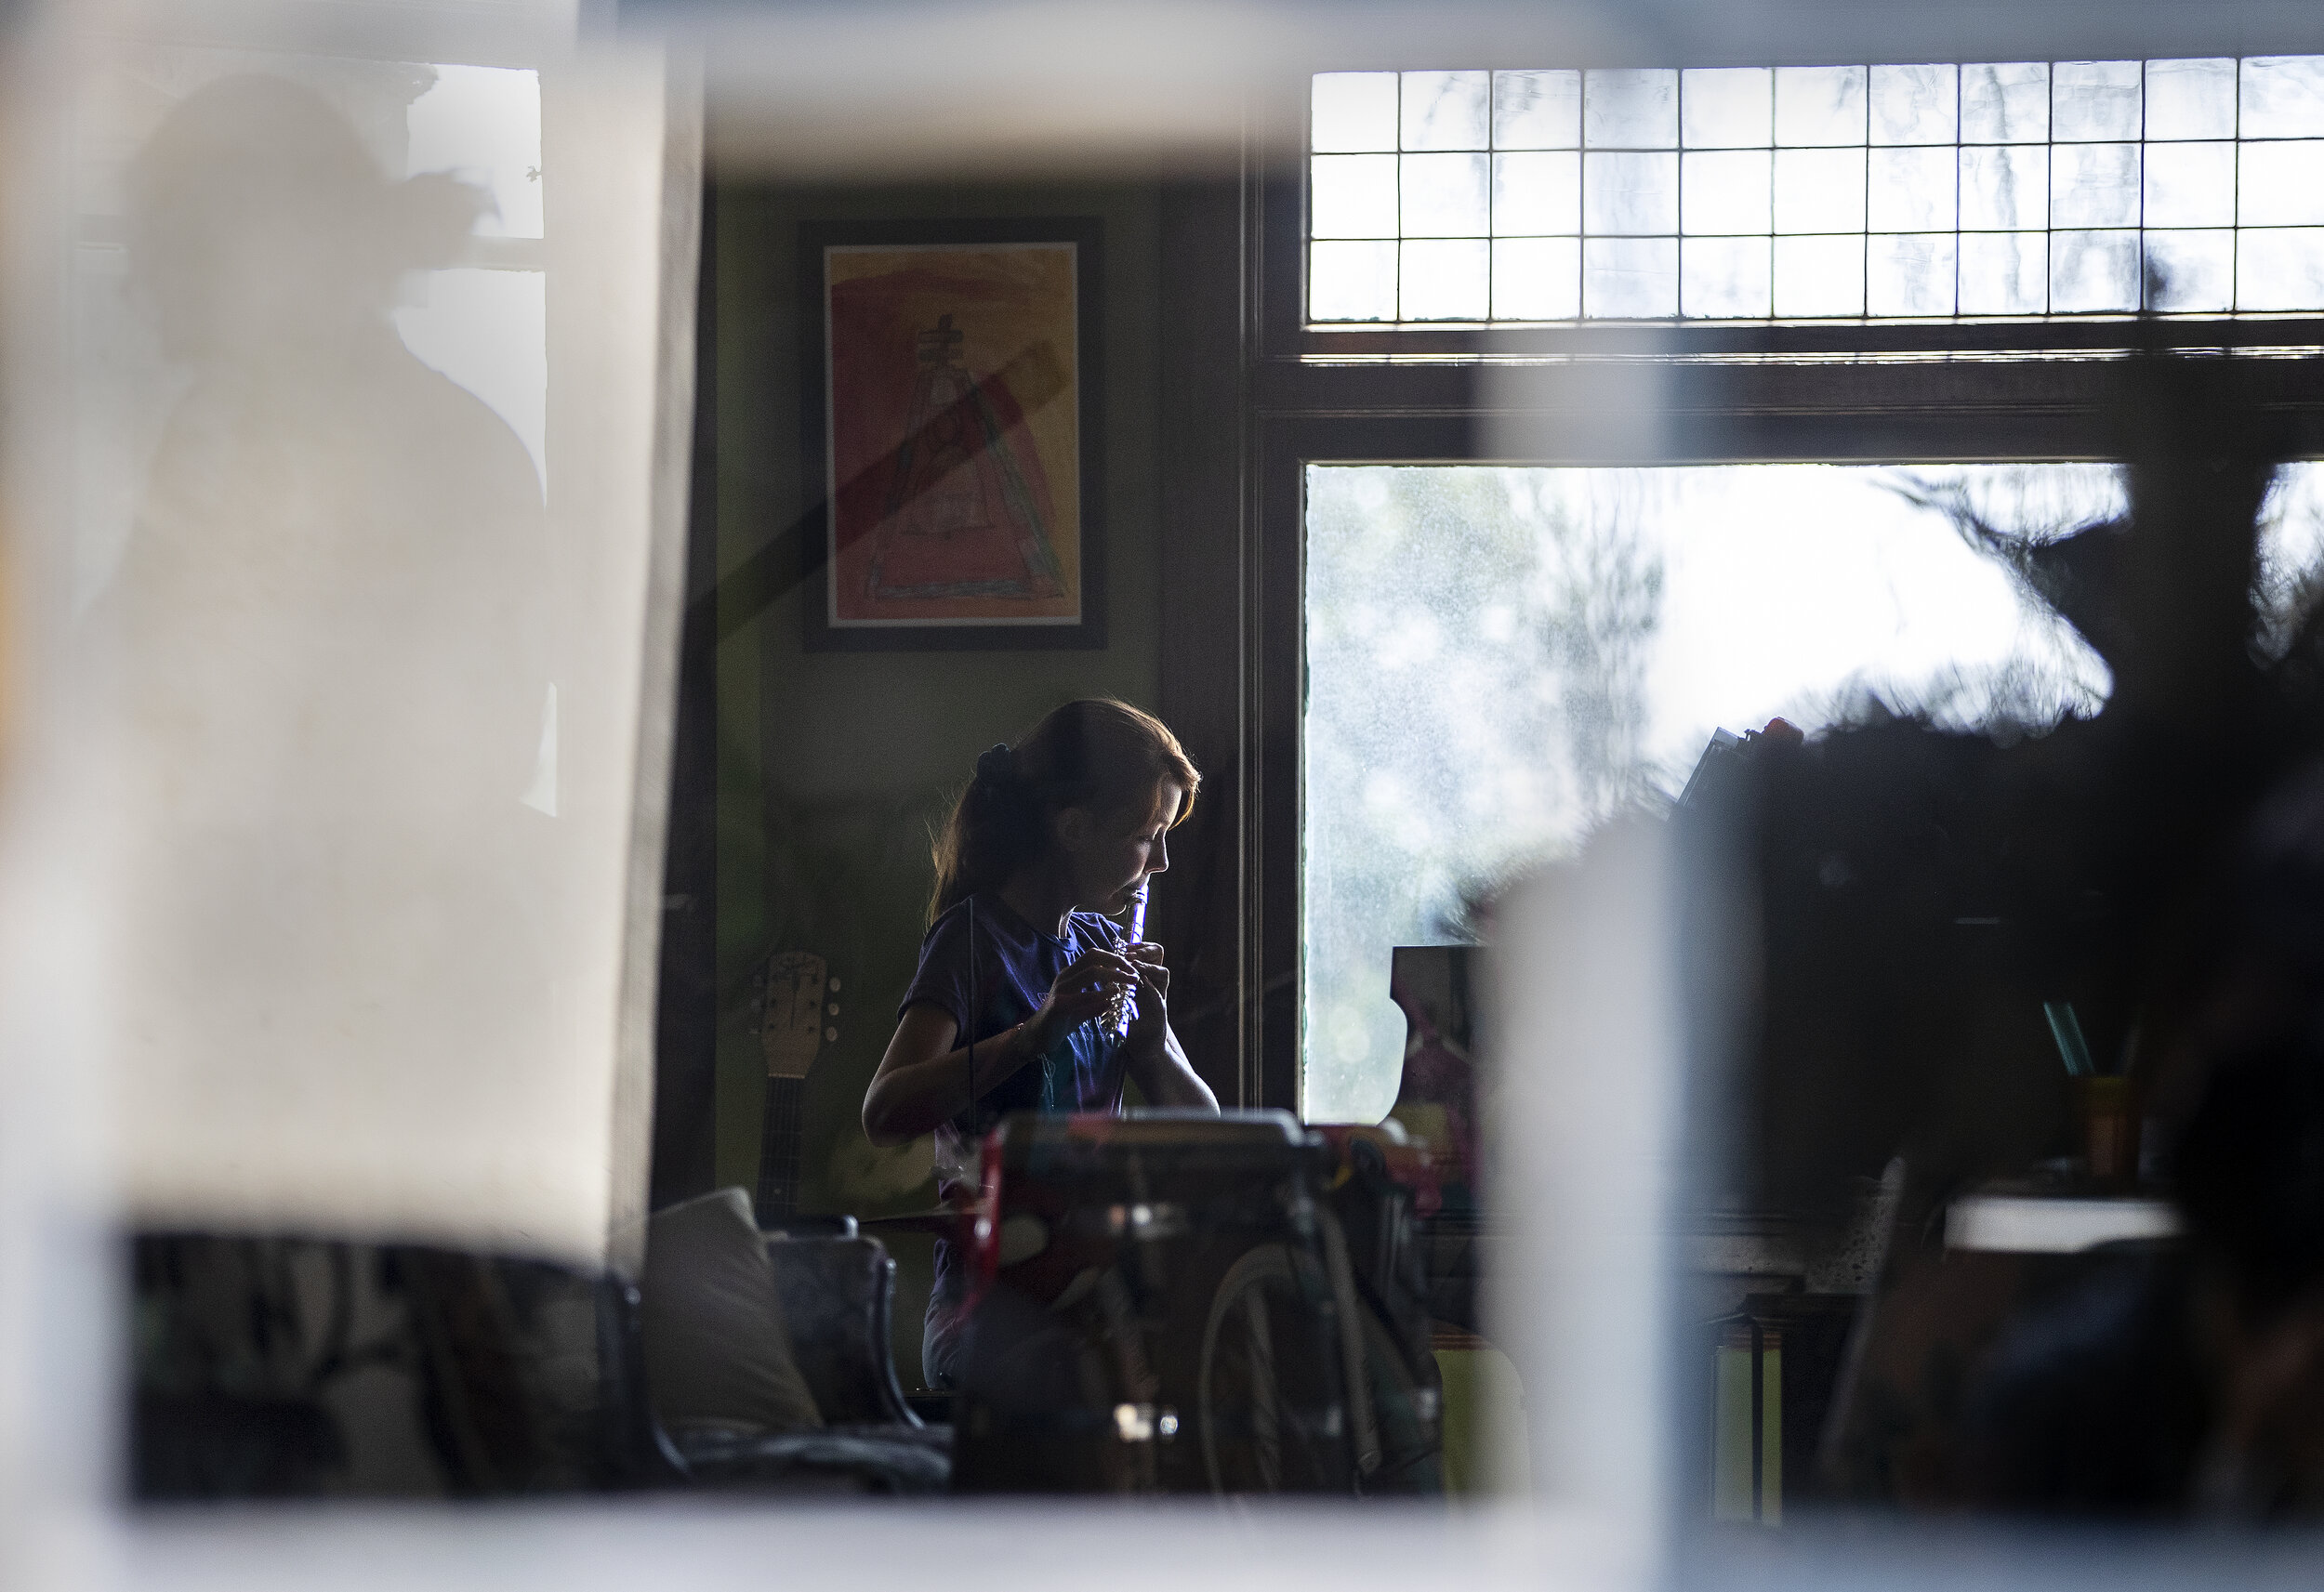  RIVERSIDE, CA- APRIL 29, 2020: Kat Bristow, 12, sits at the piano in the Roth’s living room playing the flute during music class taught by her neighbor music producer Gabe Roth during home school in the midst of the coronavirus pandemic on April 29,